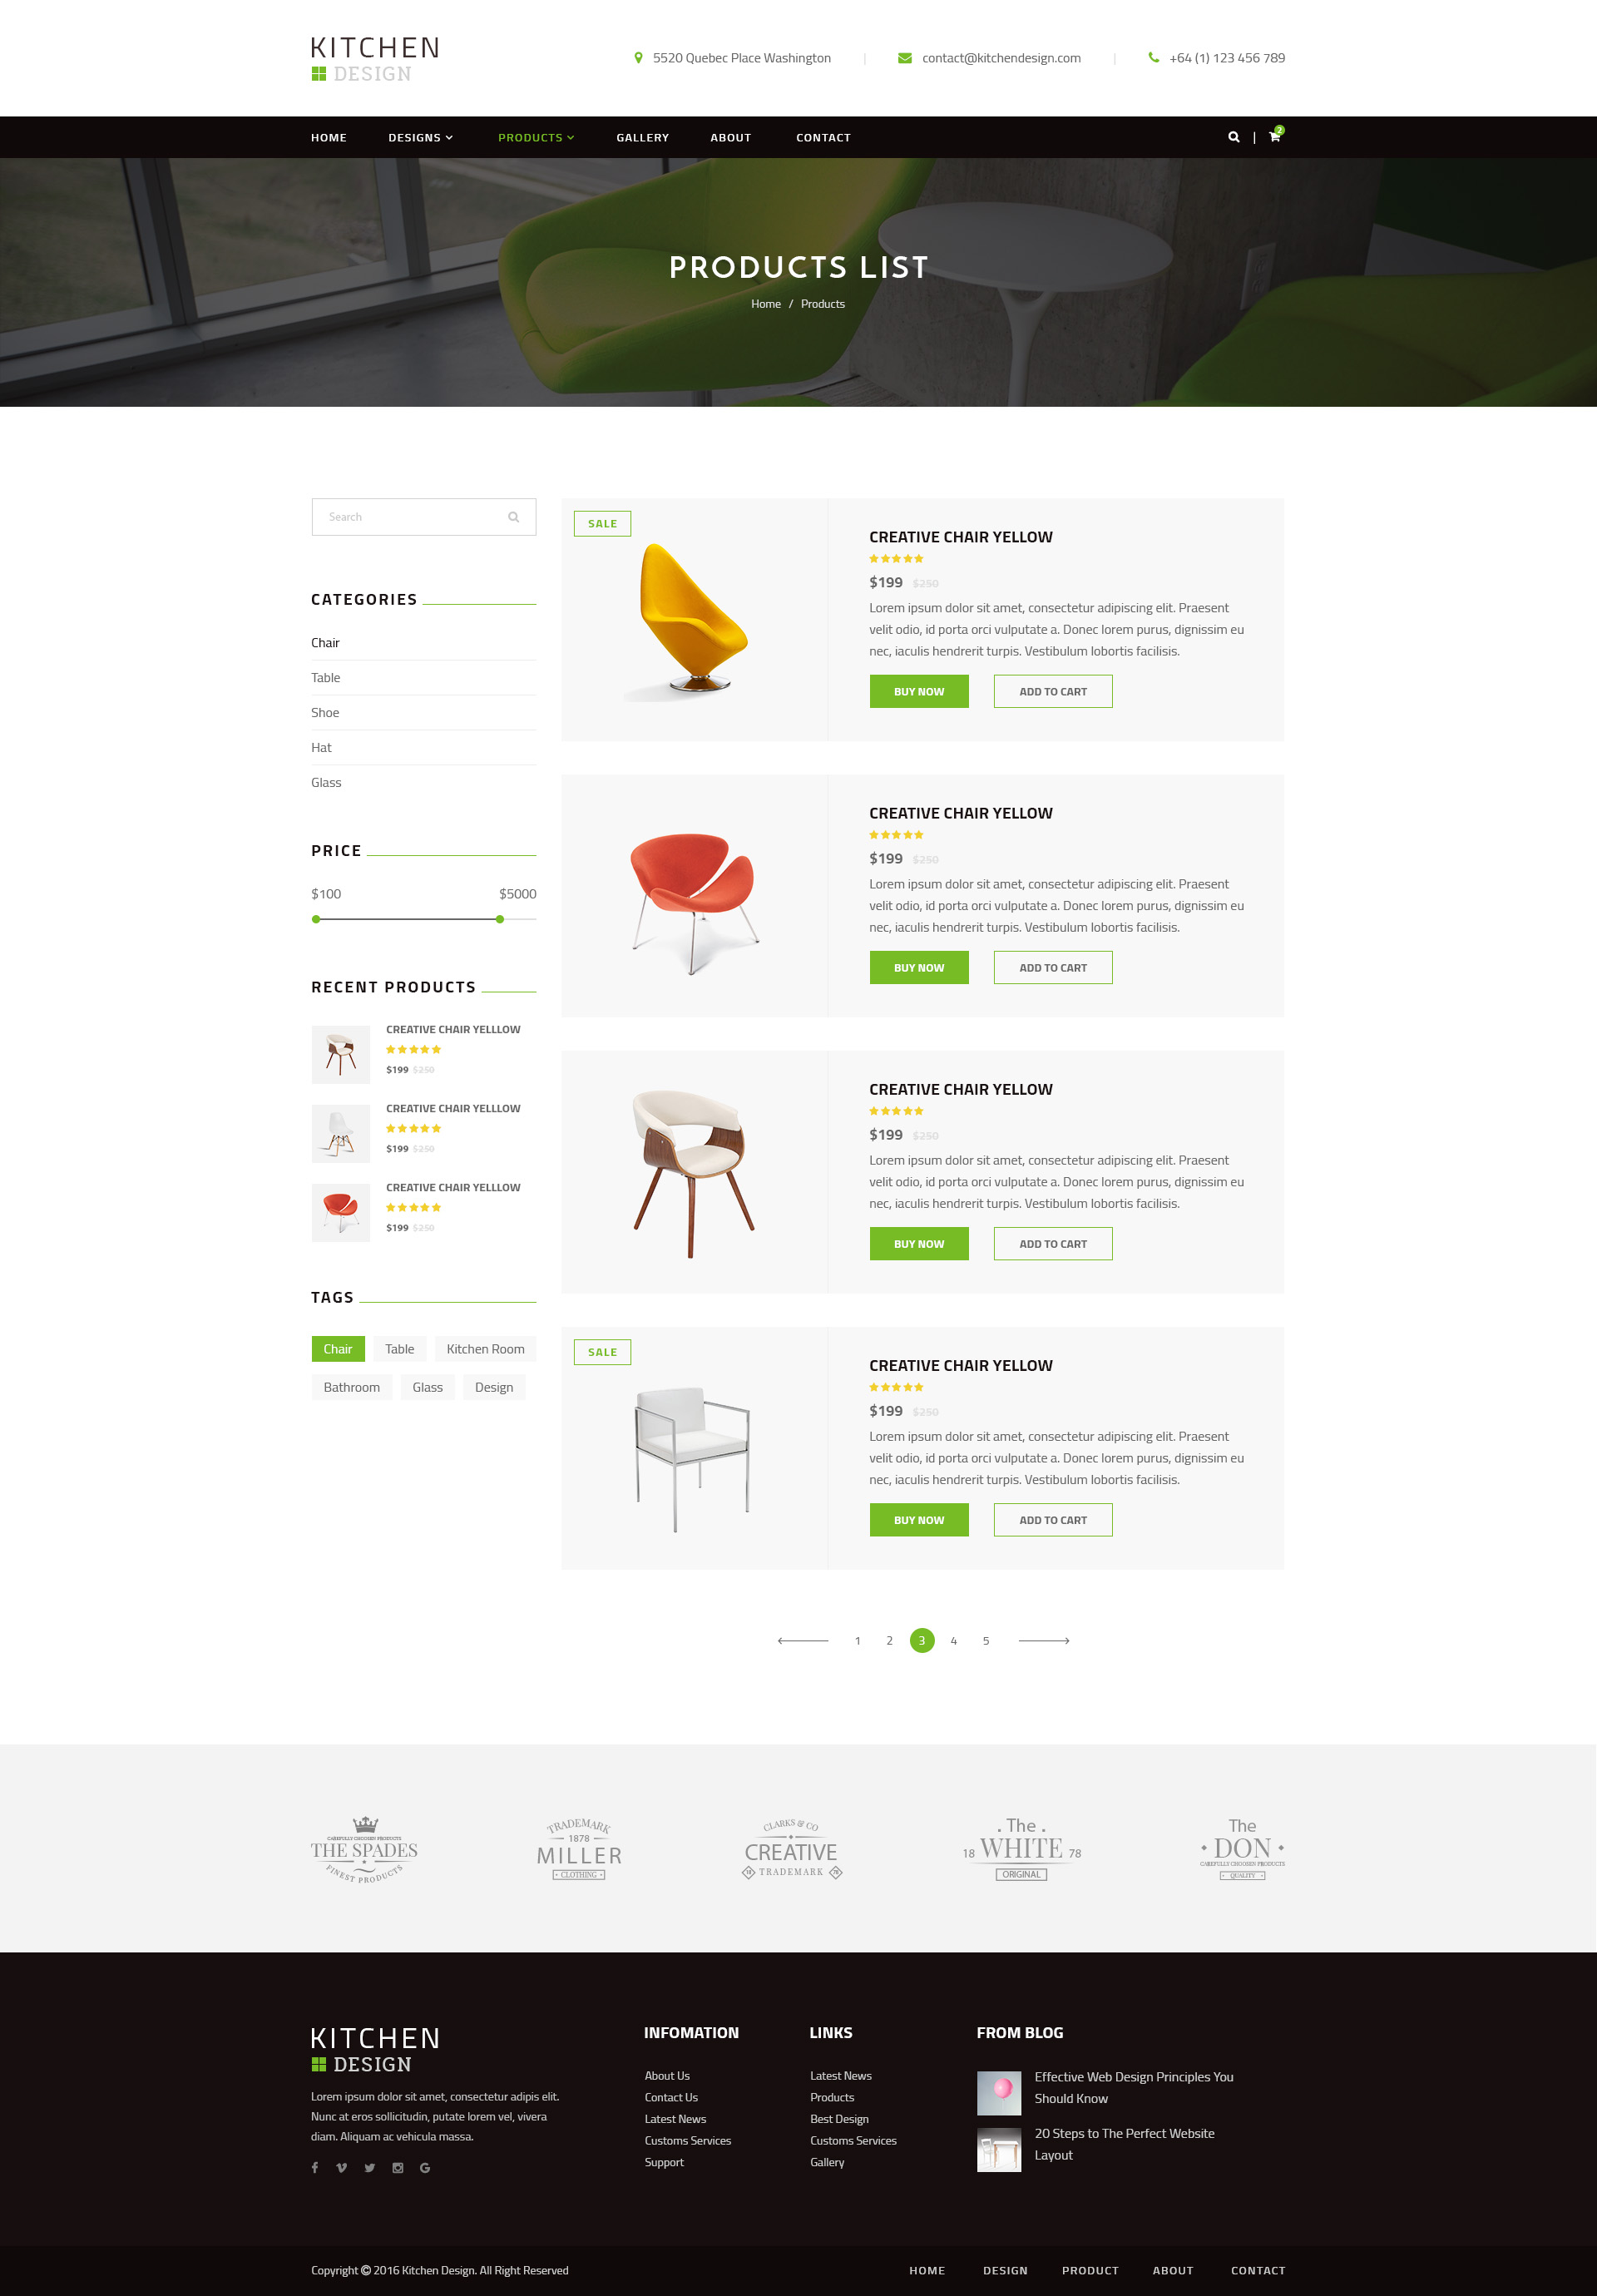 Kitchen - PSD Template by qtcmedia | ThemeForest  ... 2.jpg Kitchen_Preview/03_DESIGN.jpg Kitchen_Preview/04_DESIGN  DETAIL.jpg Kitchen_Preview/05_BOOK DESIGN.jpg Kitchen_Preview/06_PRODUCTS  SIDEBAR GRID.jpg ...